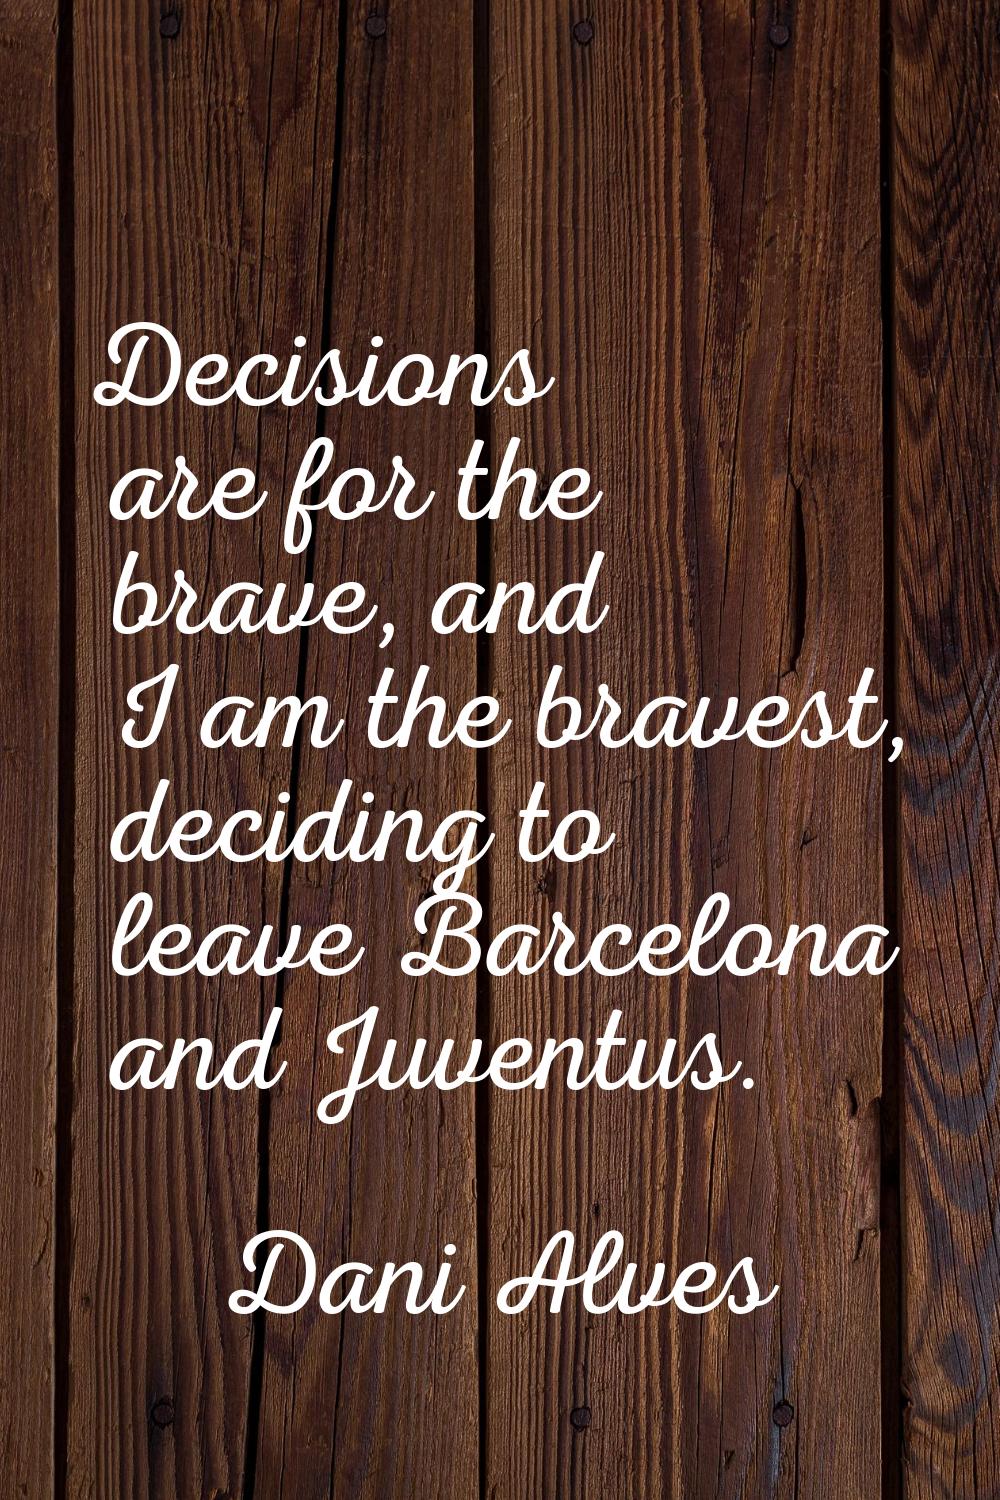 Decisions are for the brave, and I am the bravest, deciding to leave Barcelona and Juventus.